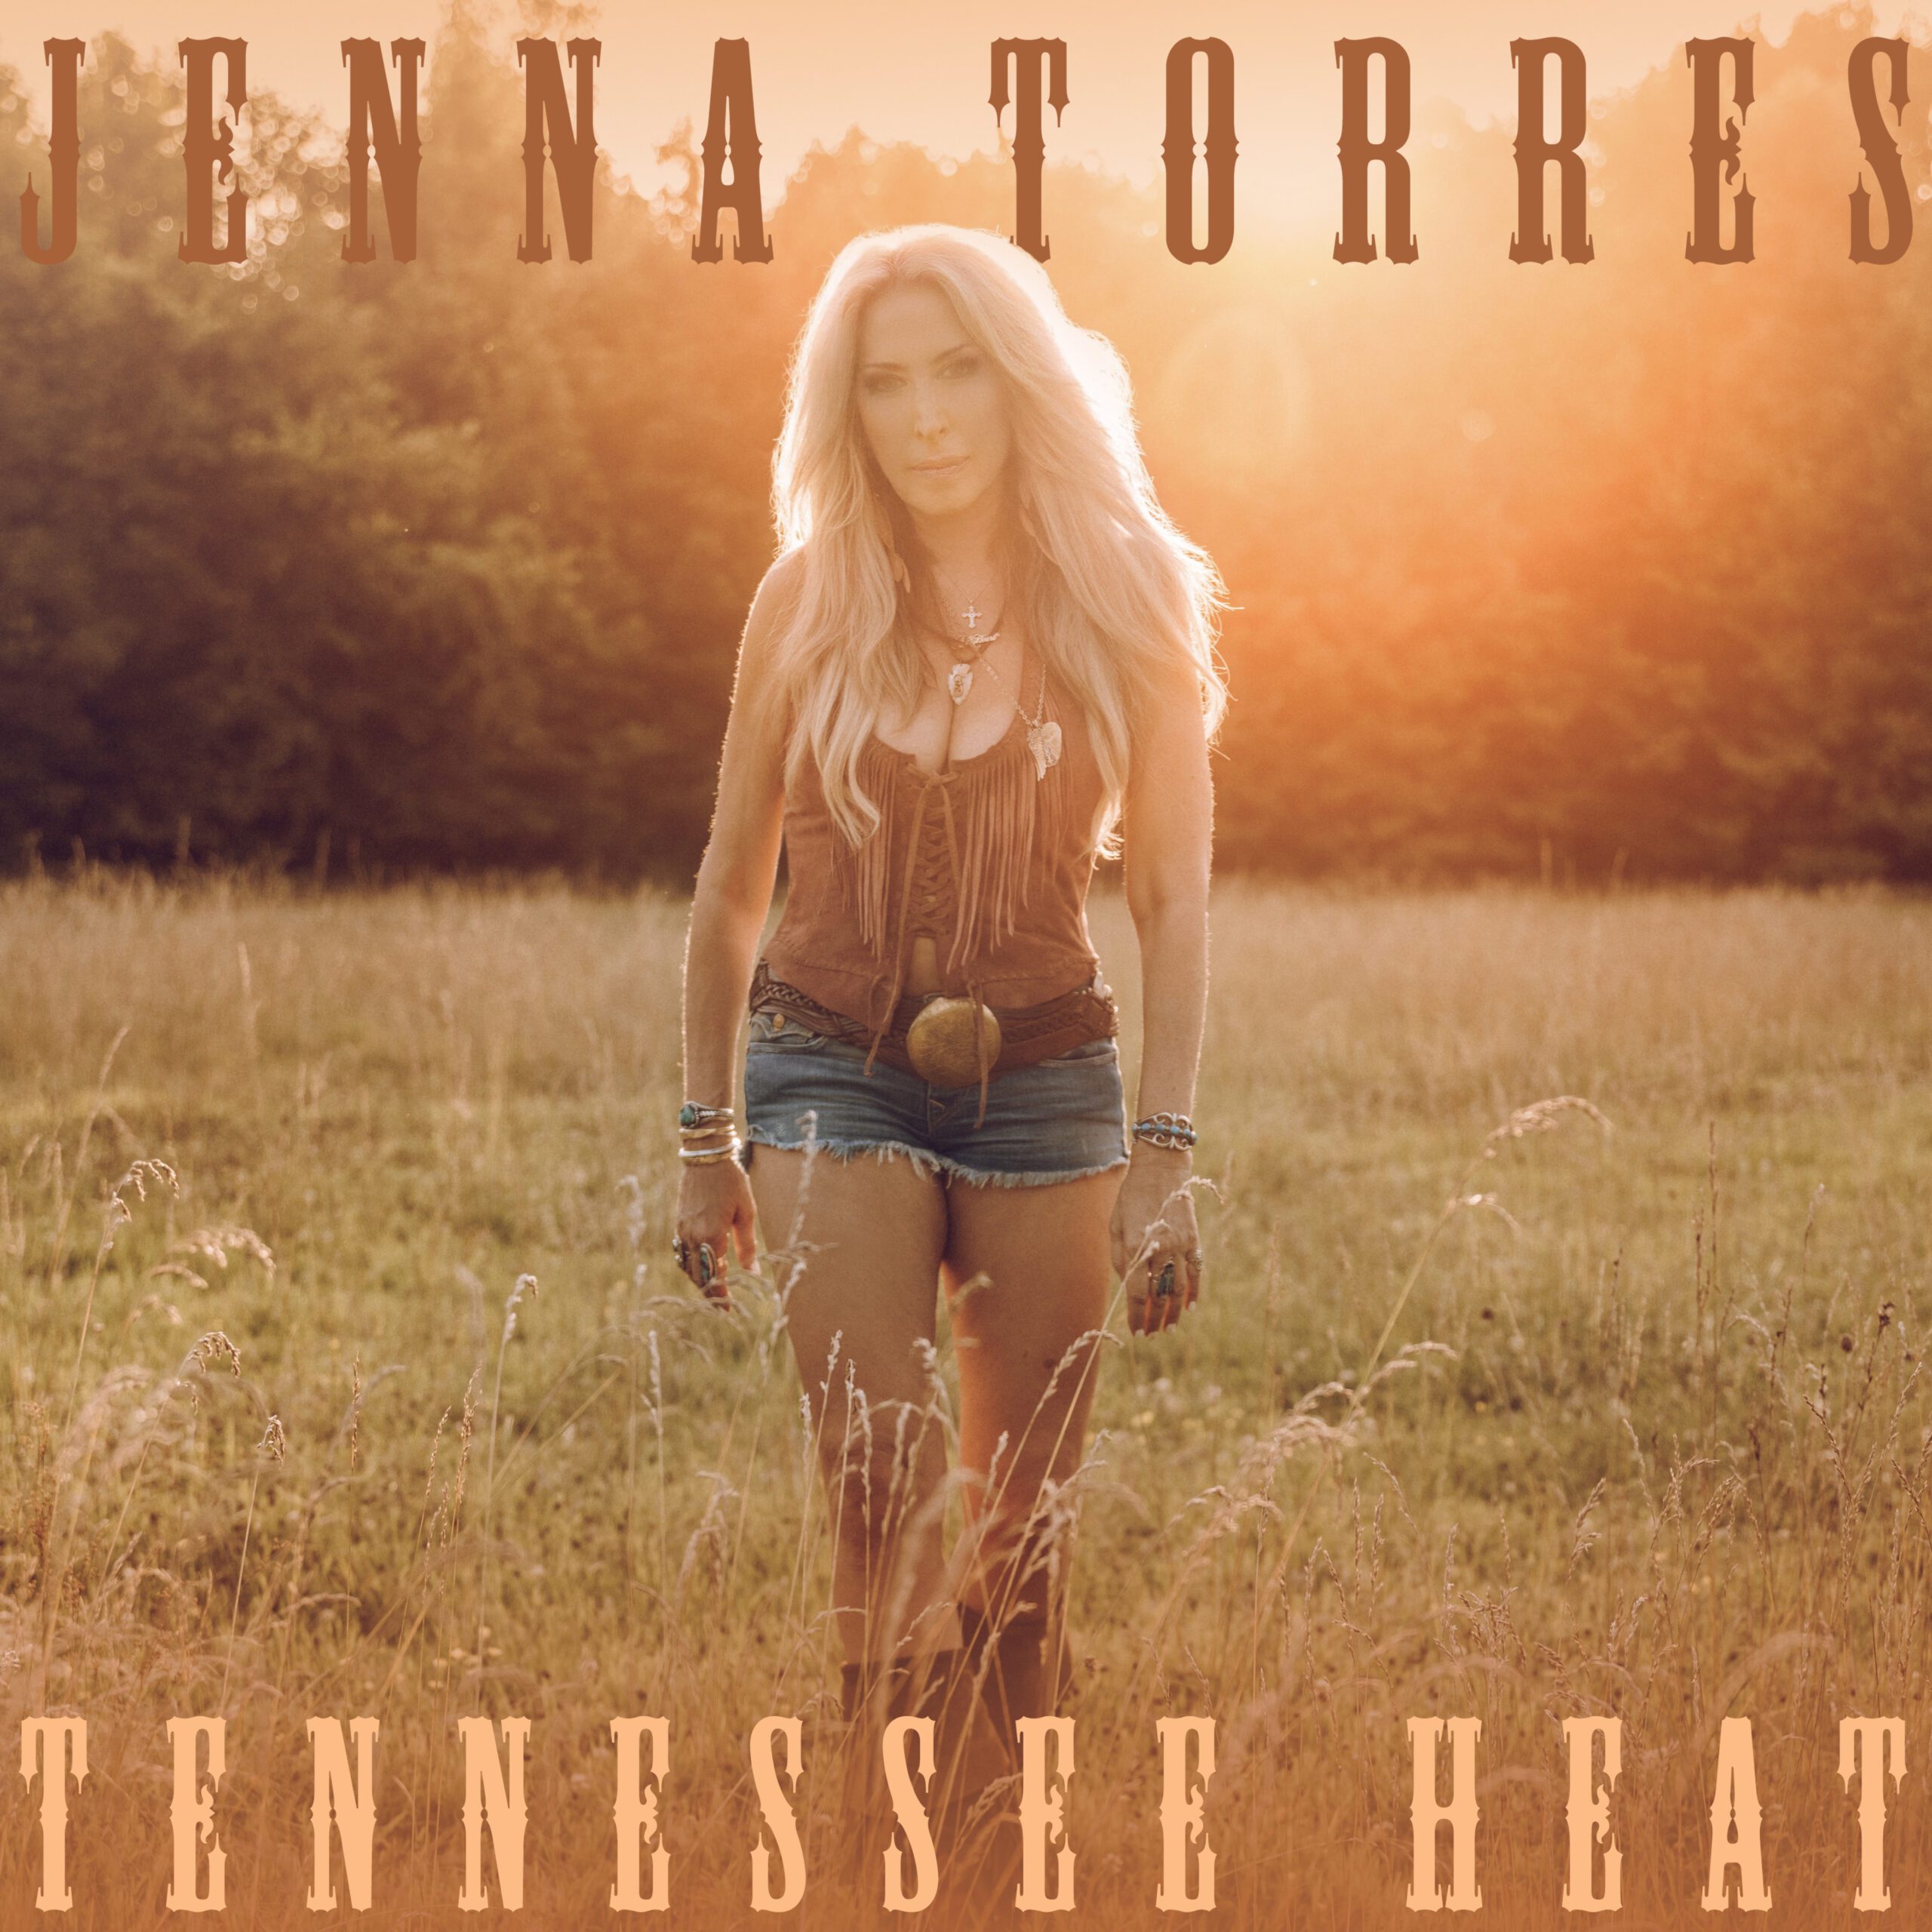 Music Premiere: Country singer-songwriter Jenna Torres releases music video for “hot” new single “Tennessee Heat”